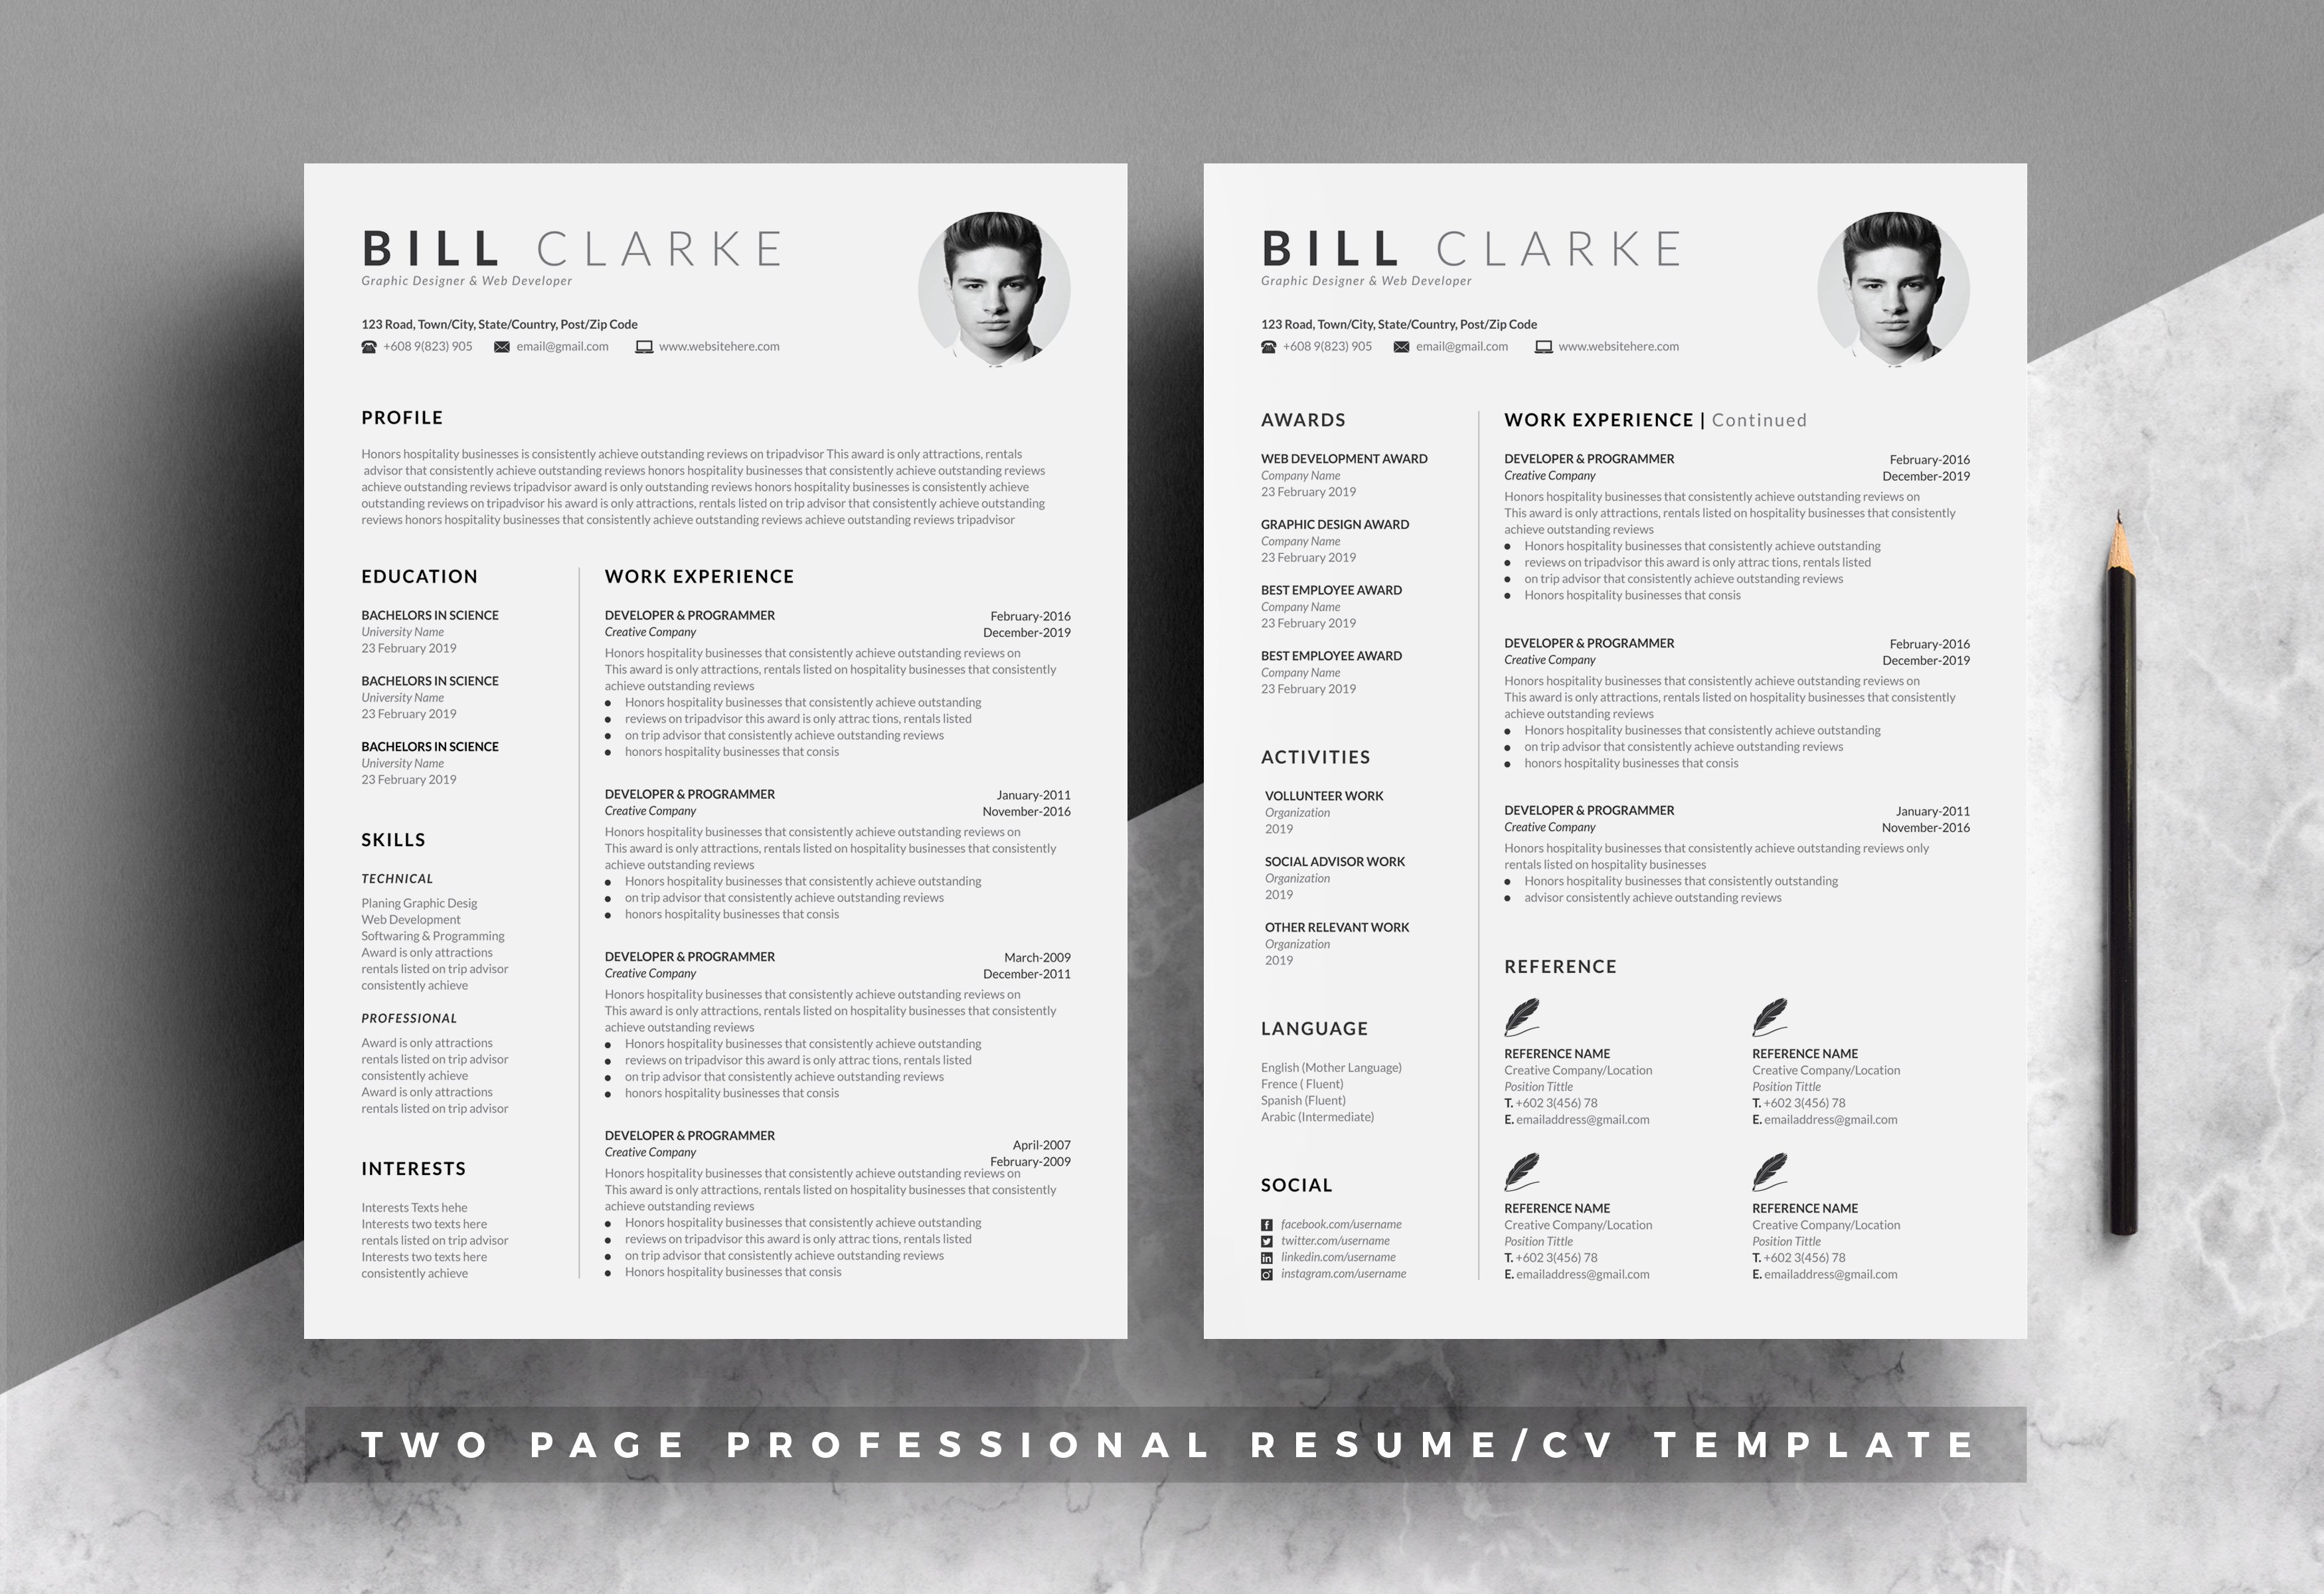 Word Resume & Cover Letter preview image.